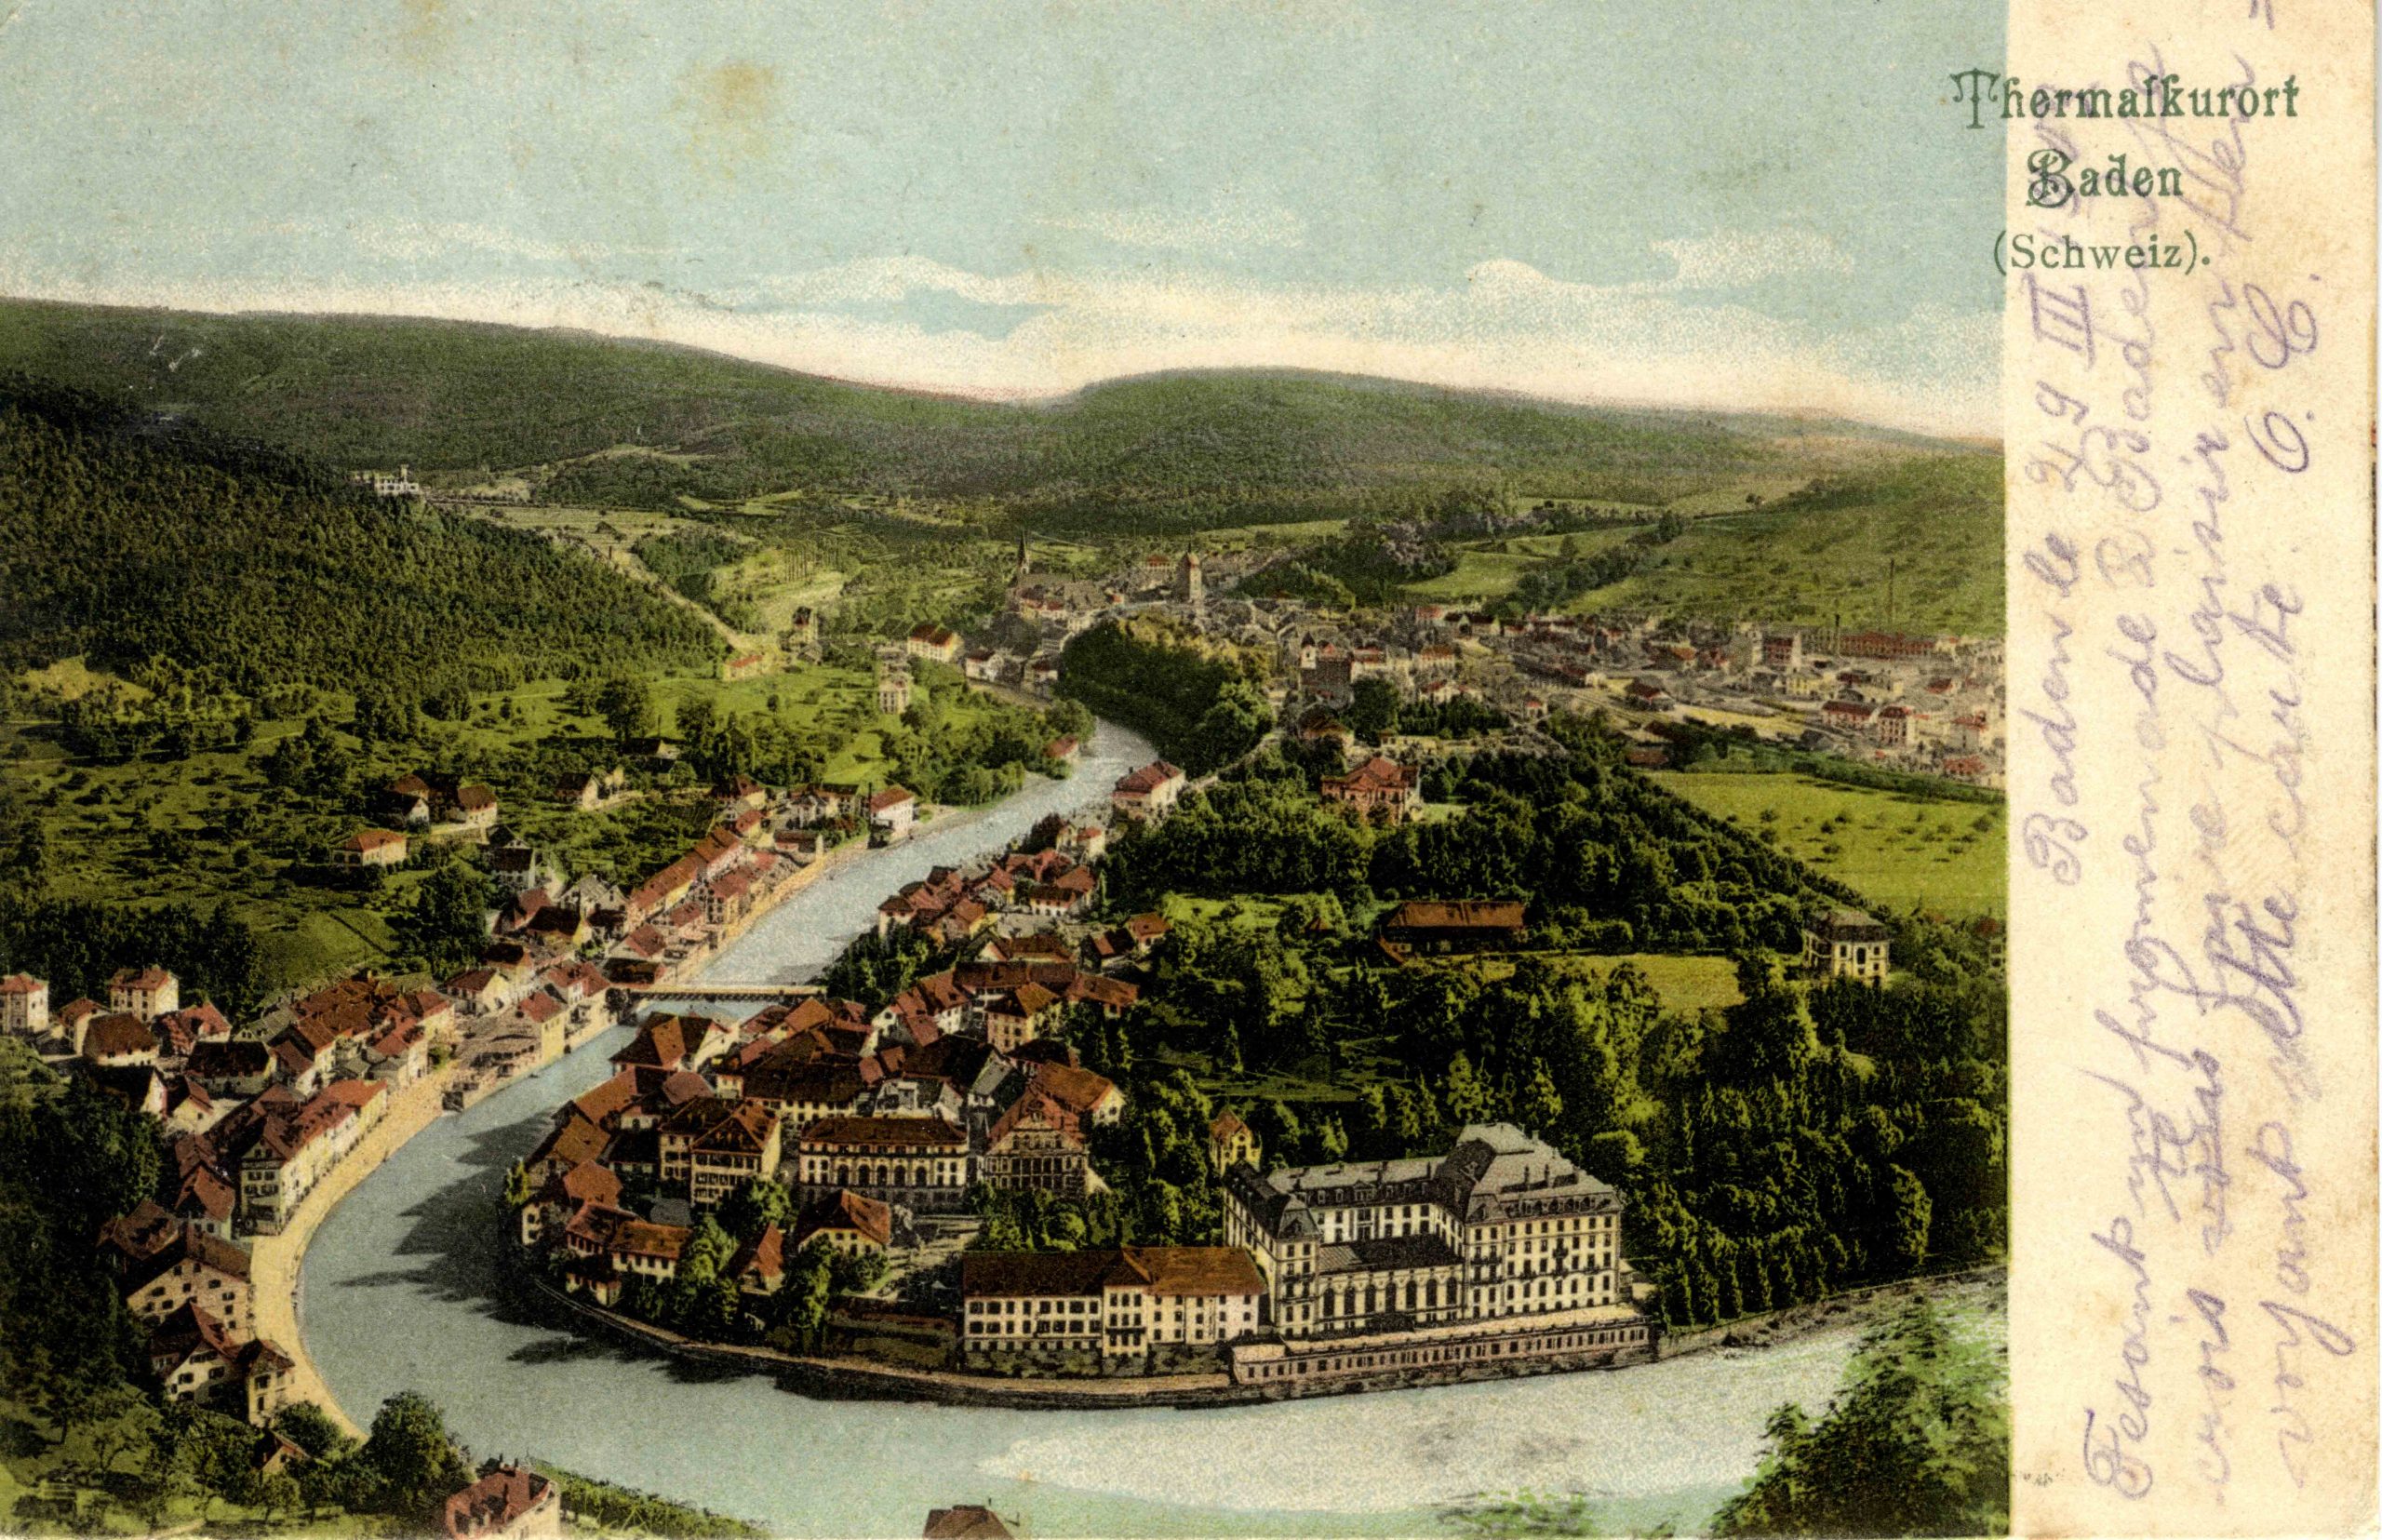 Baden. Postcard from the Andrea Schaer collection.